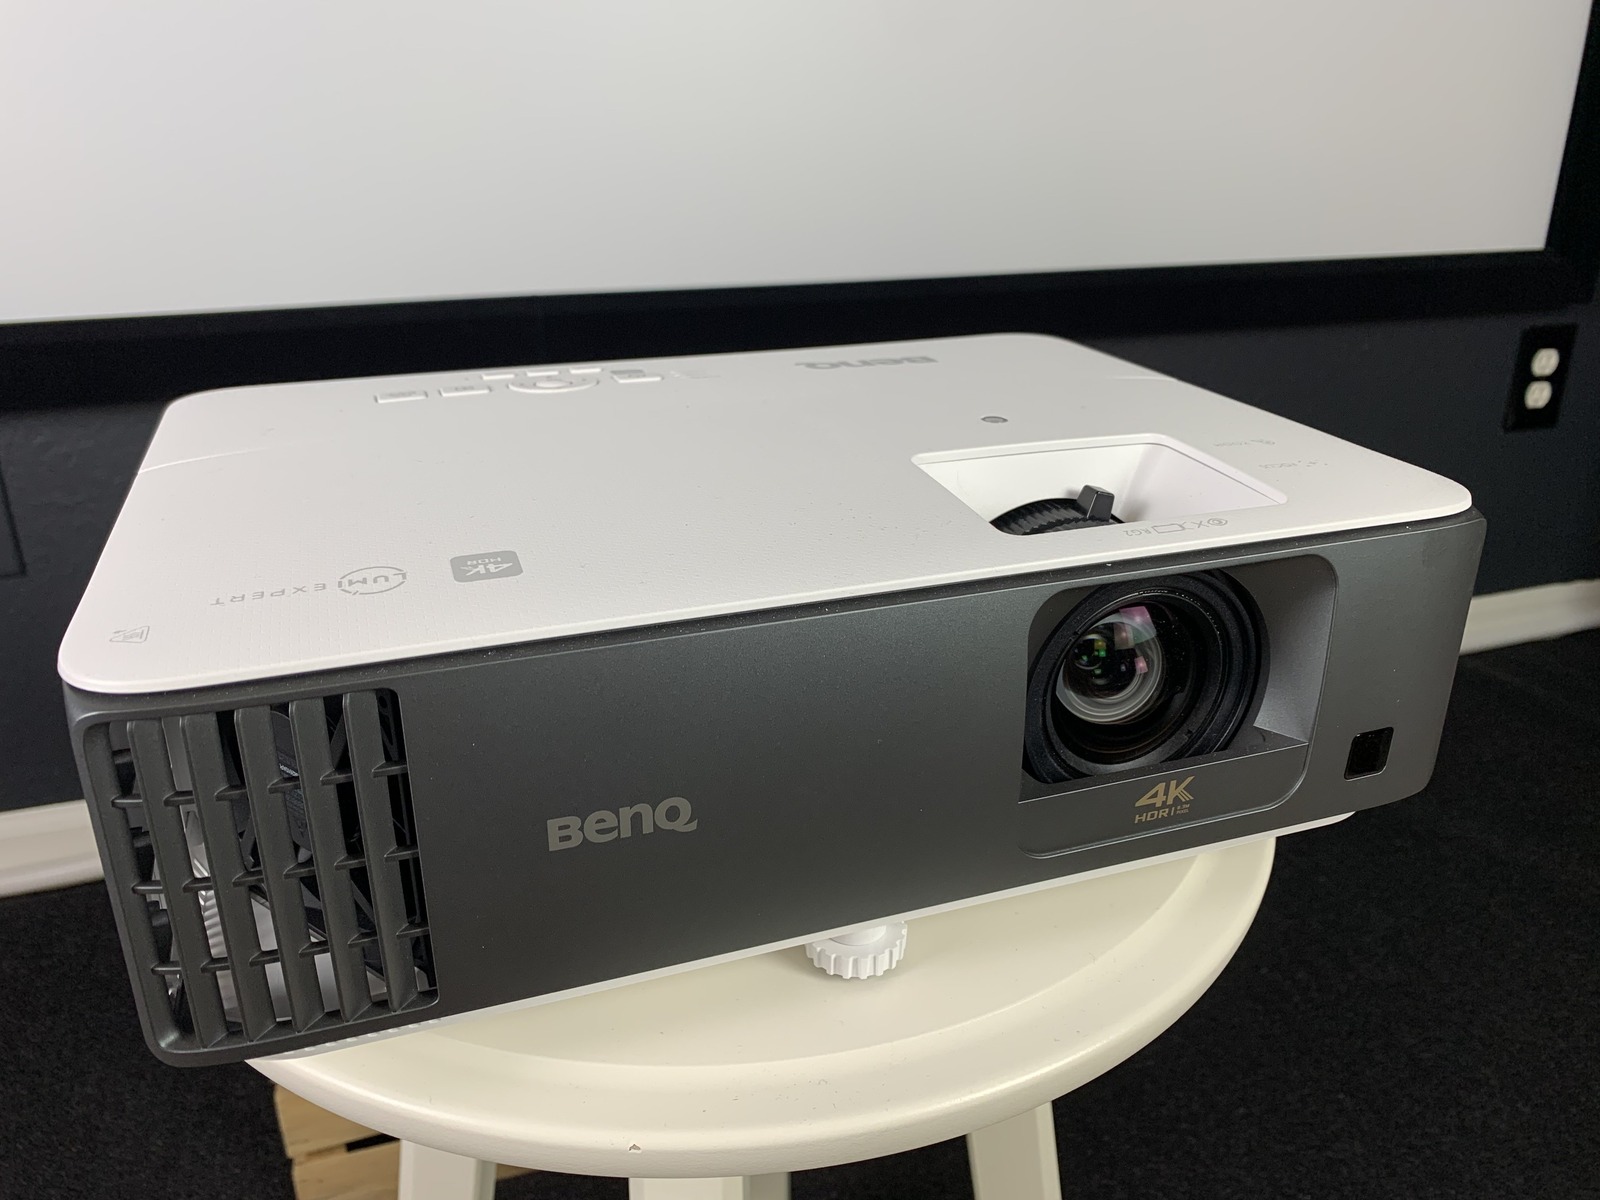 How To Turn On Benq Projector